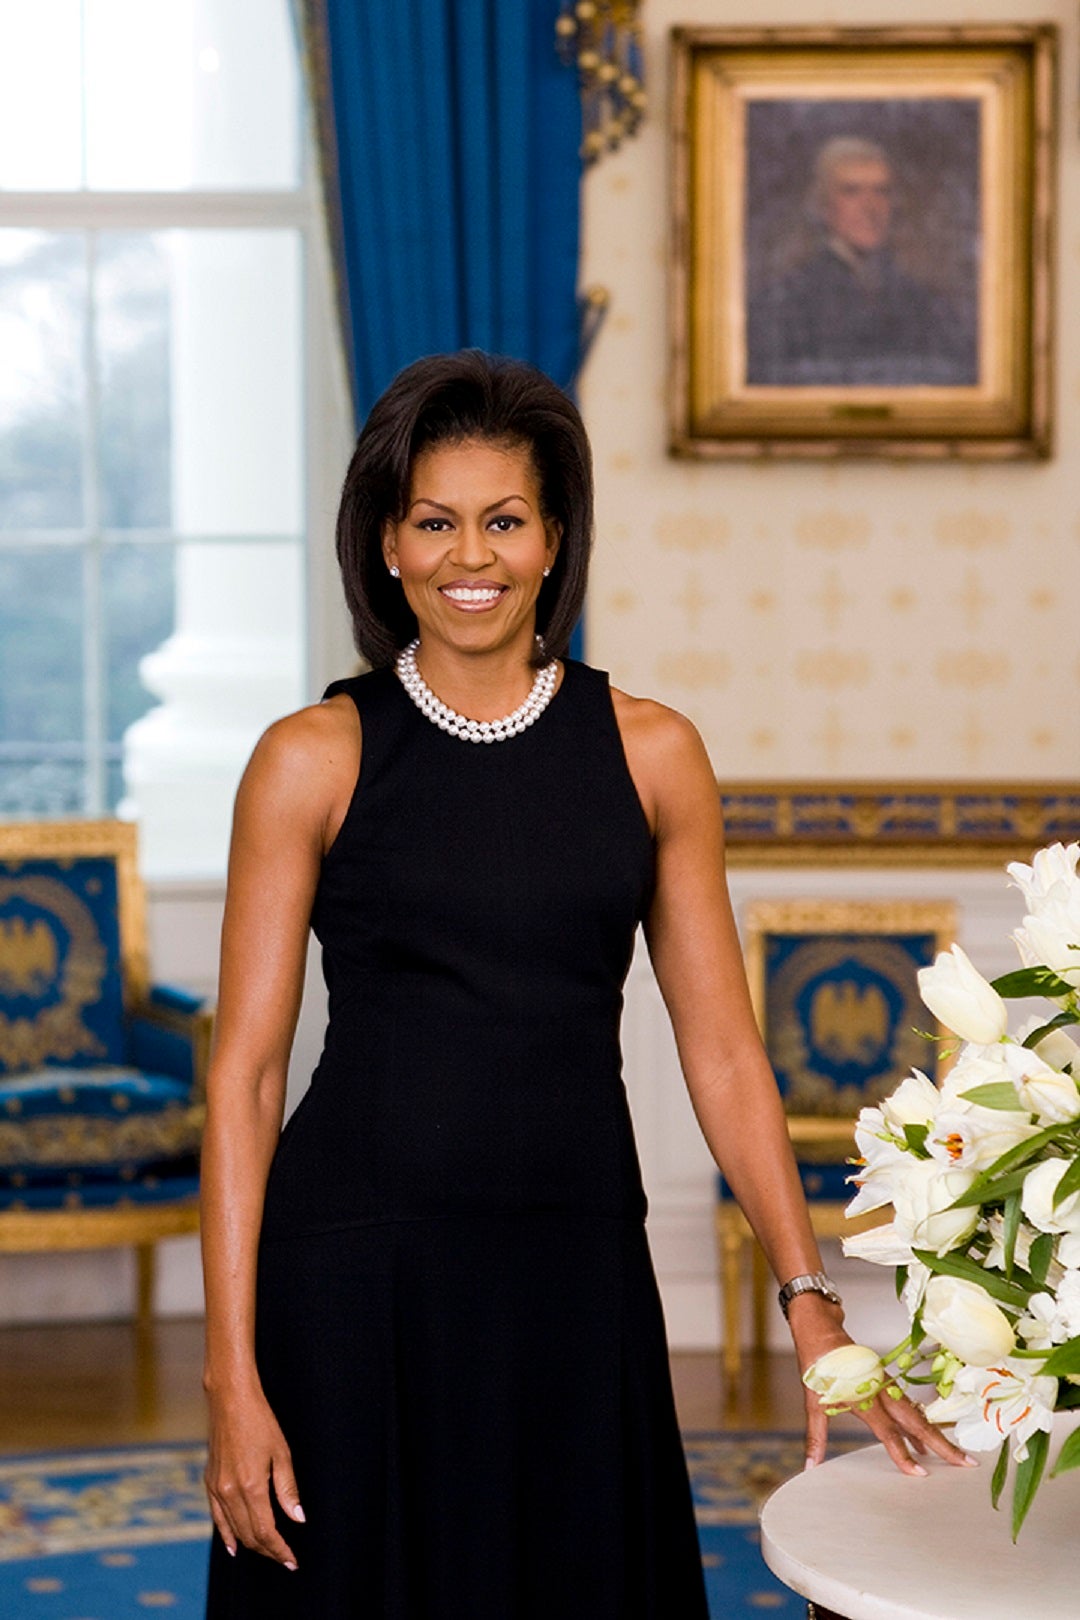 The Light We Carry: Michelle Obama’s self-help slogans